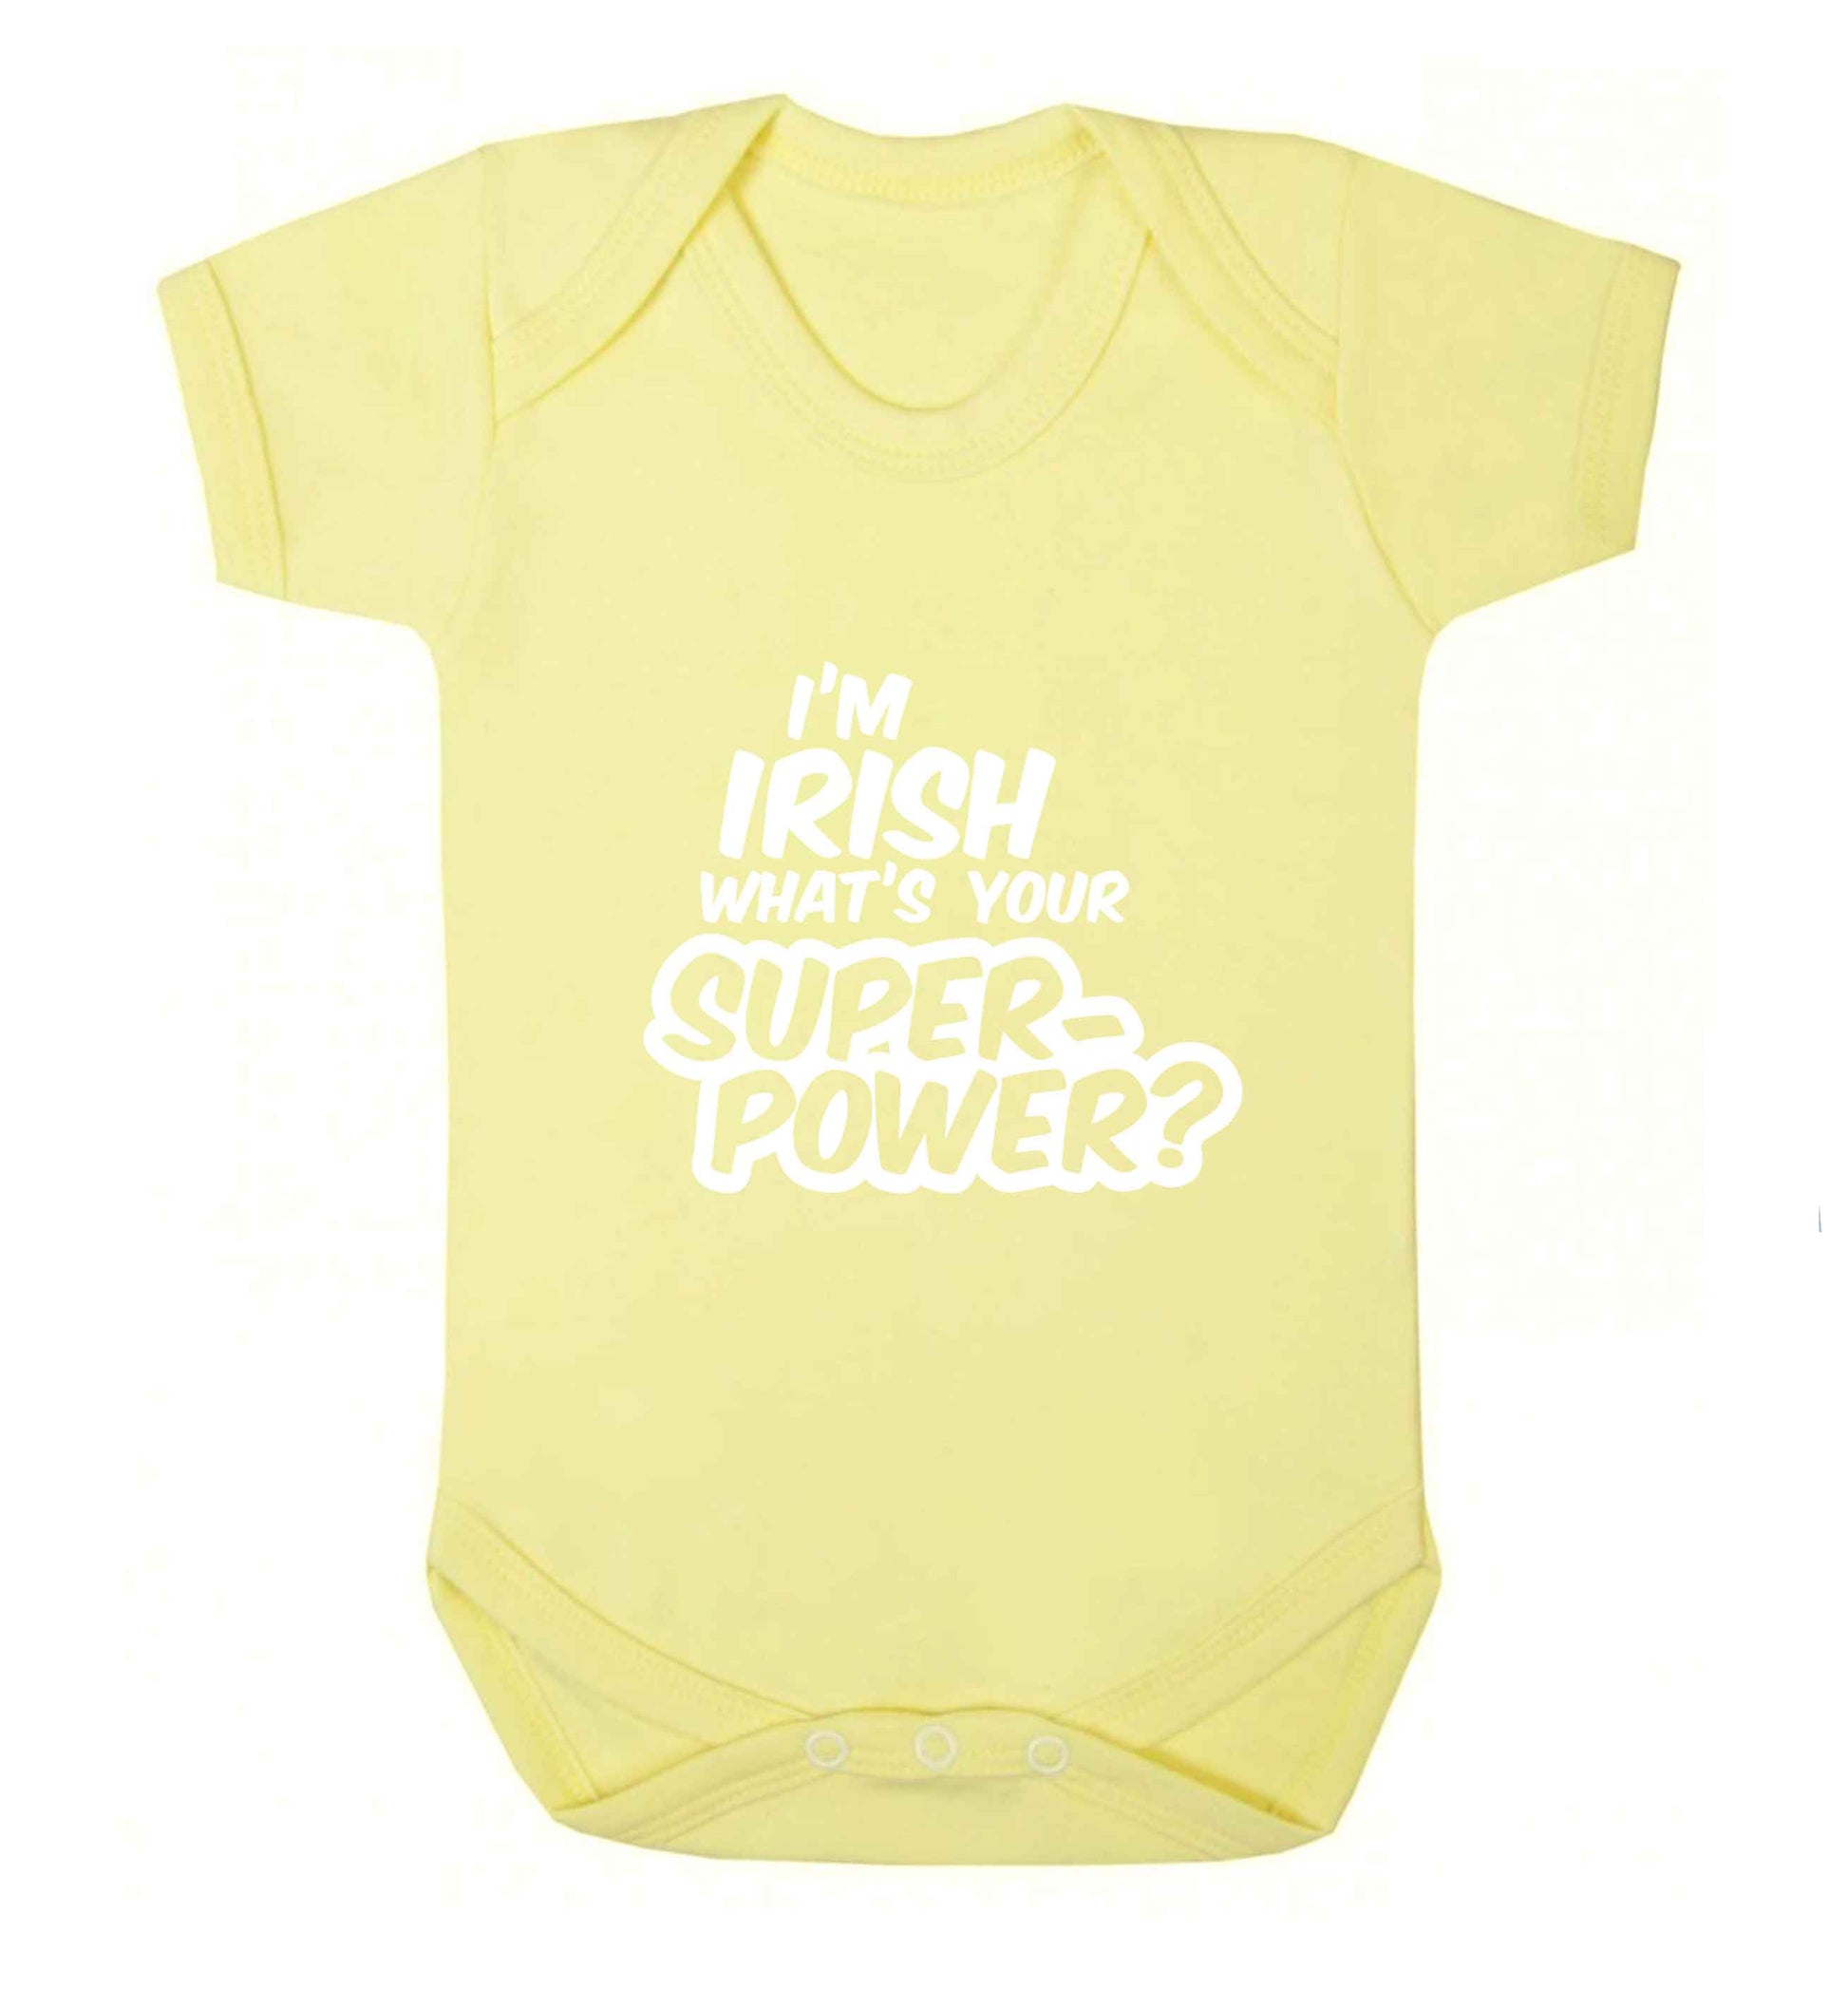 I'm Irish what's your superpower? baby vest pale yellow 18-24 months